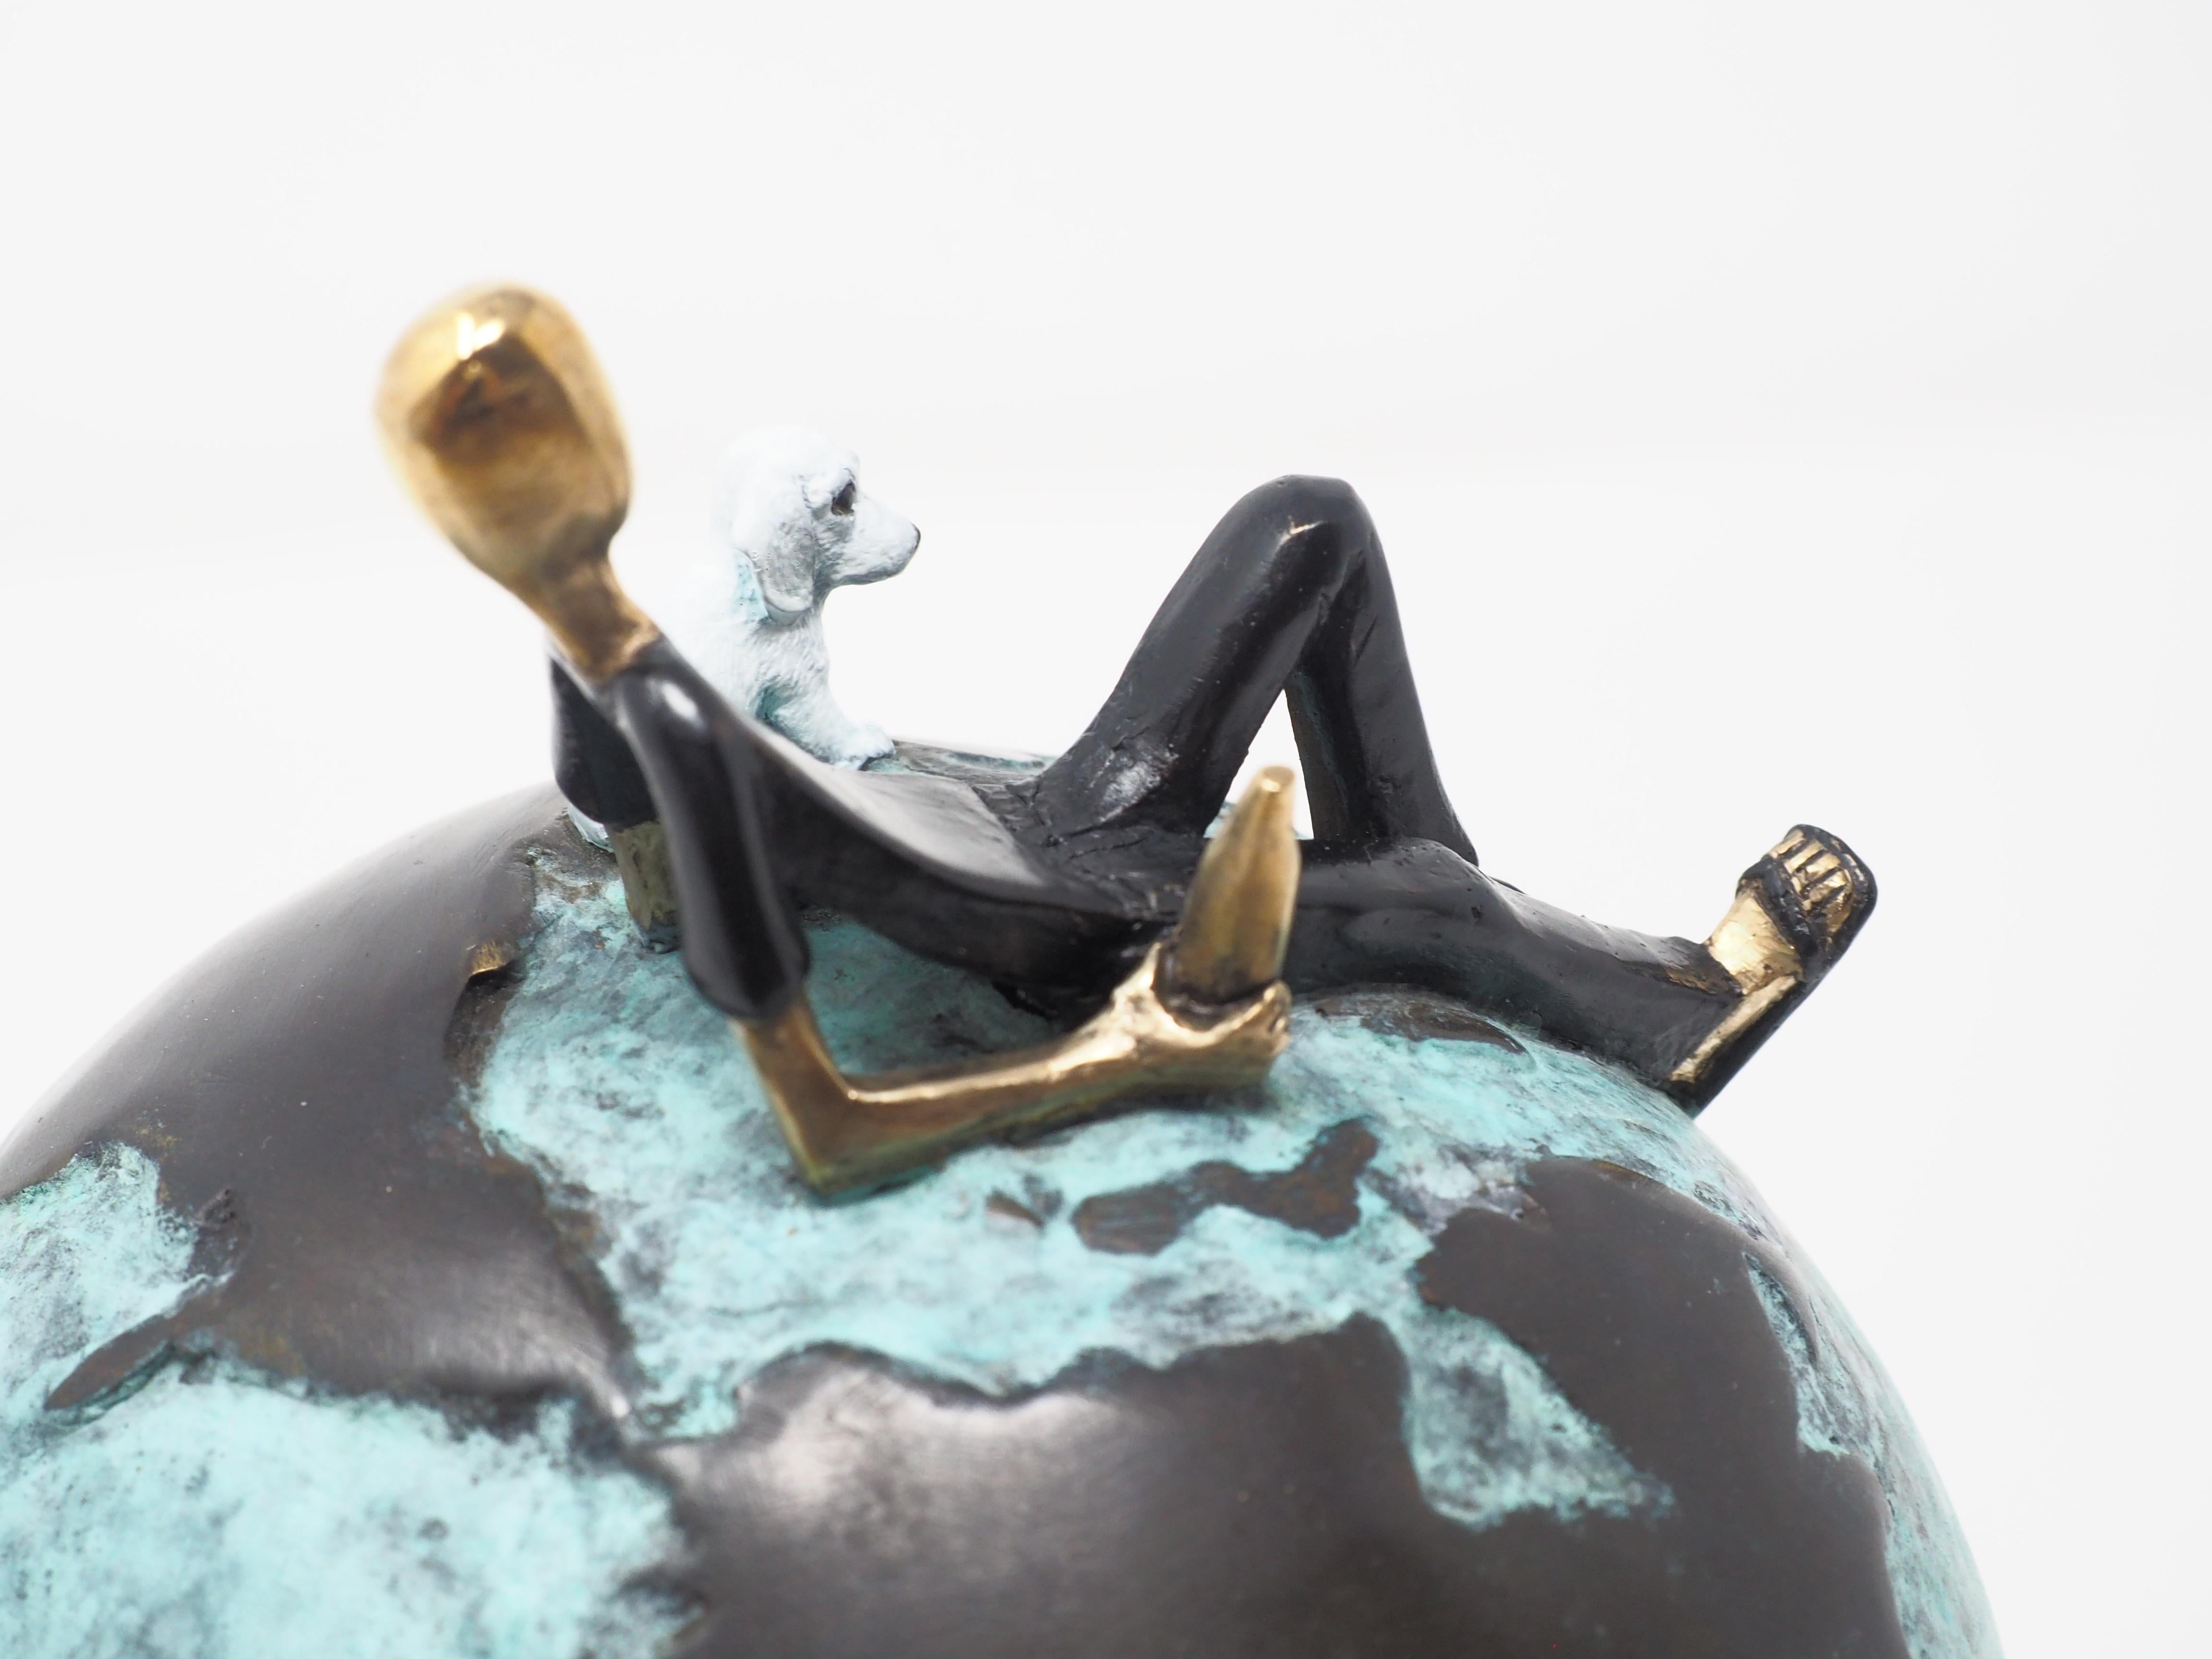 Laid back- figurative bronze sculpture of a man with a dog on a globe - Sculpture by Mireia Serra